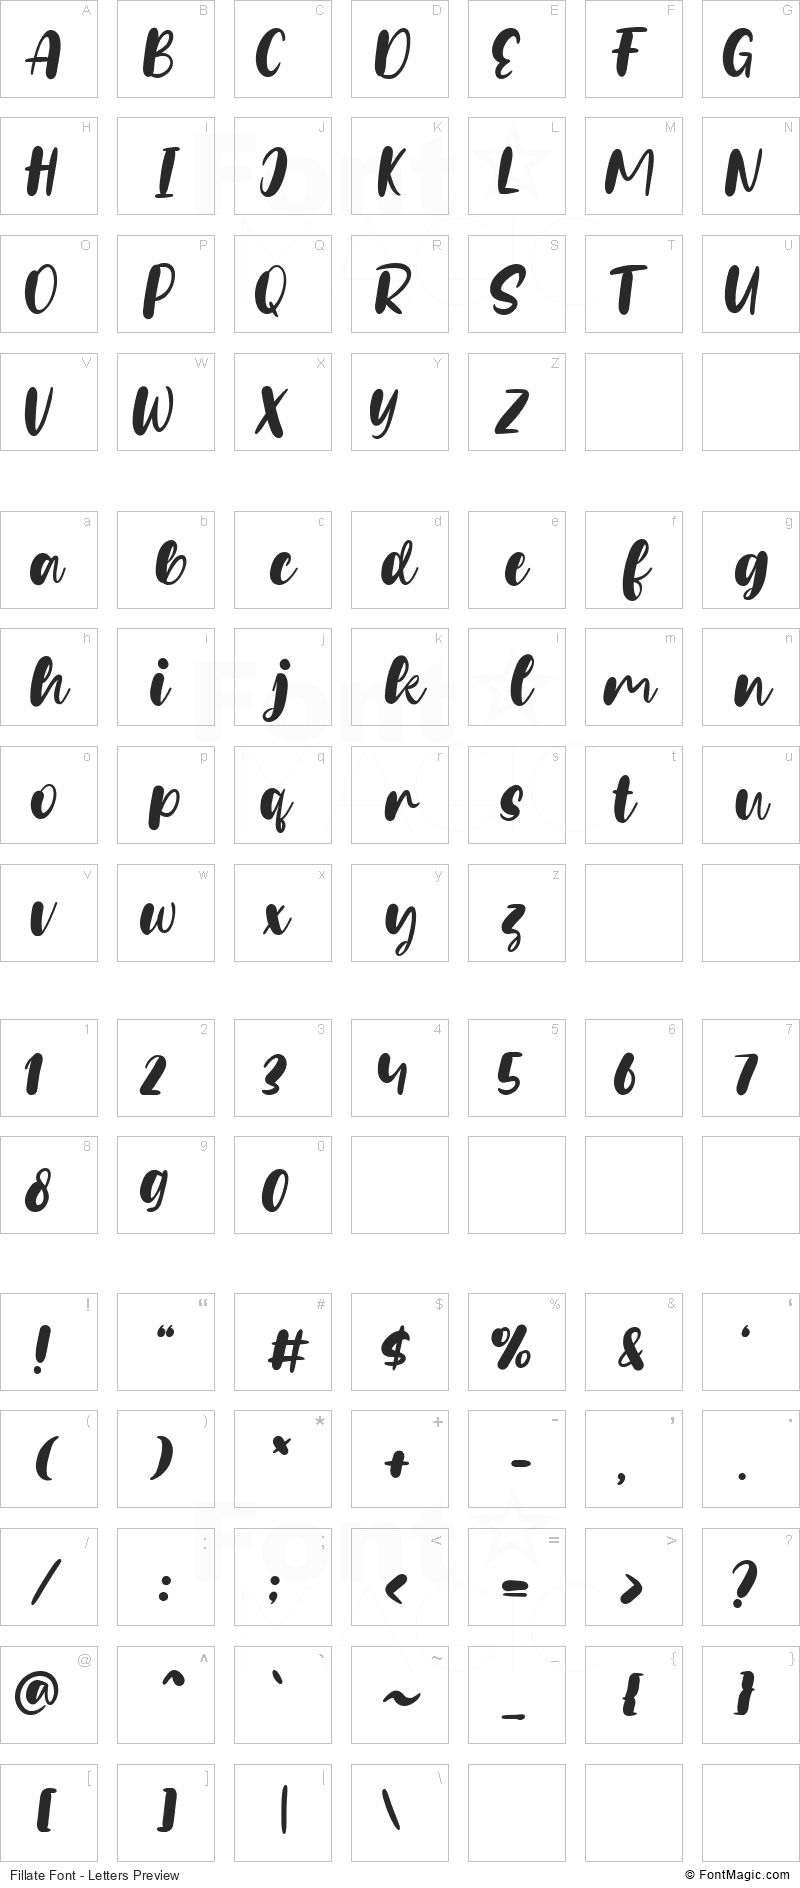 Fillate Font - All Latters Preview Chart